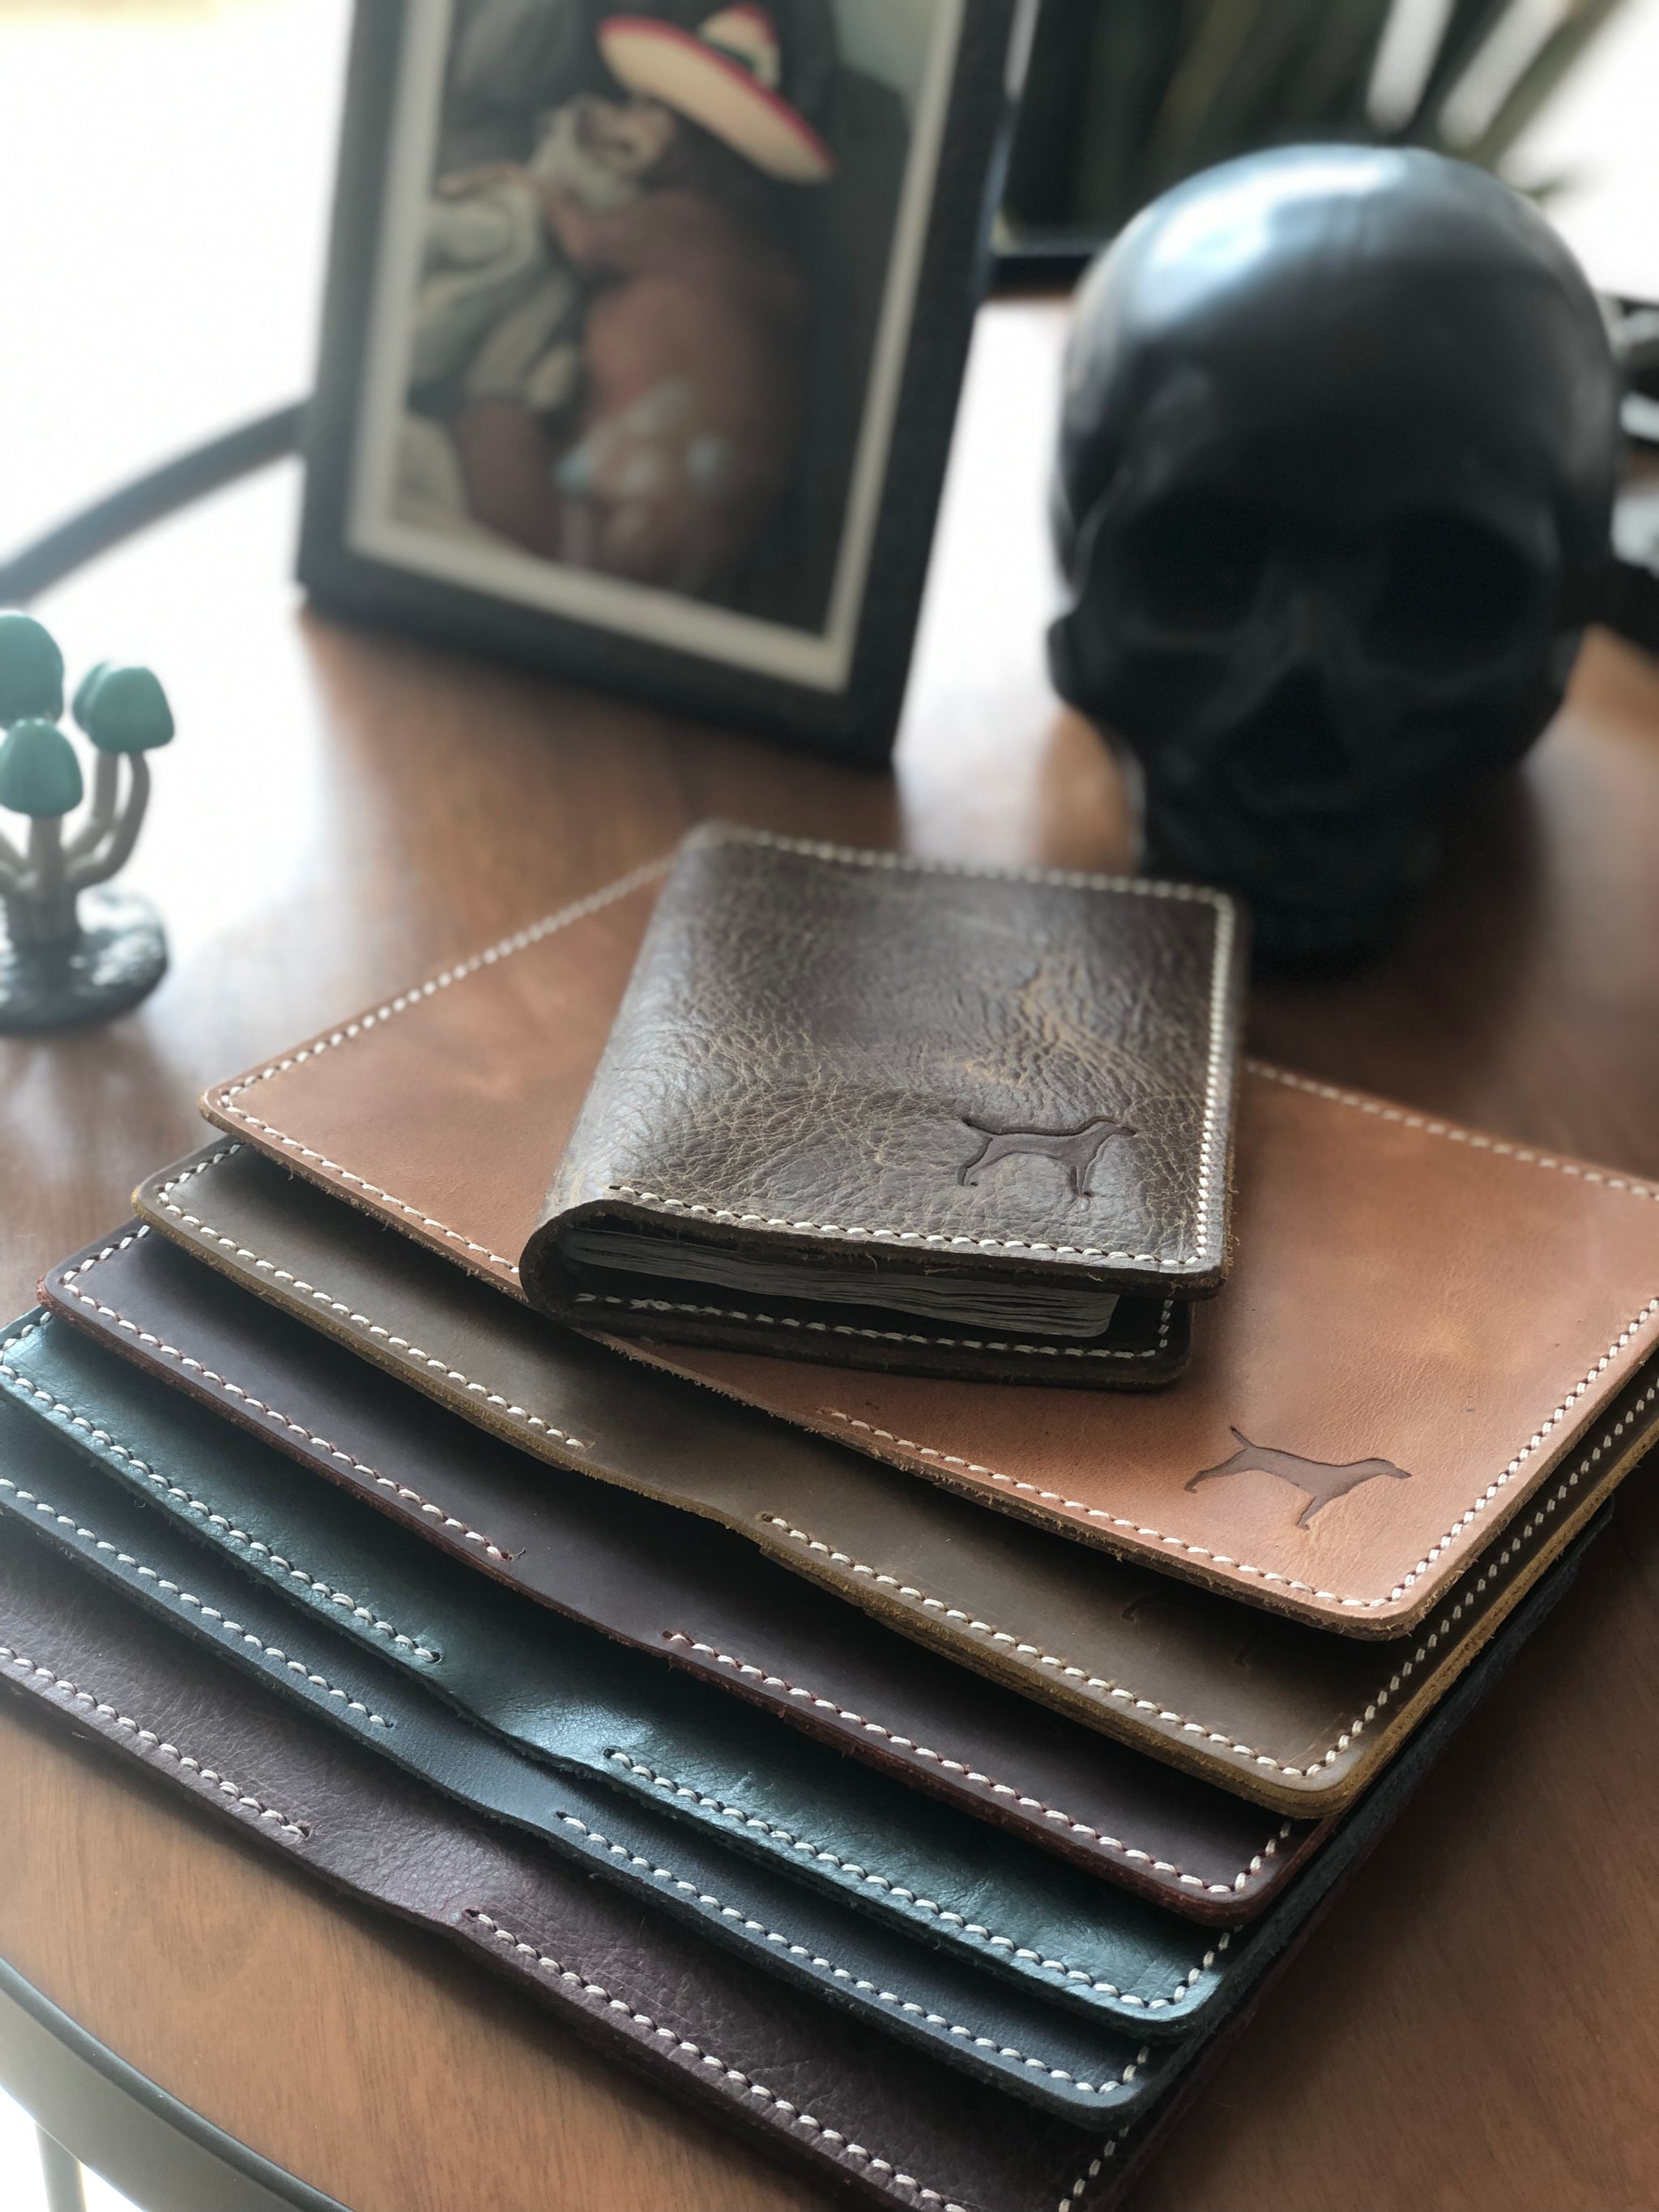 The Oaxaca passport holder - cowhide and leather